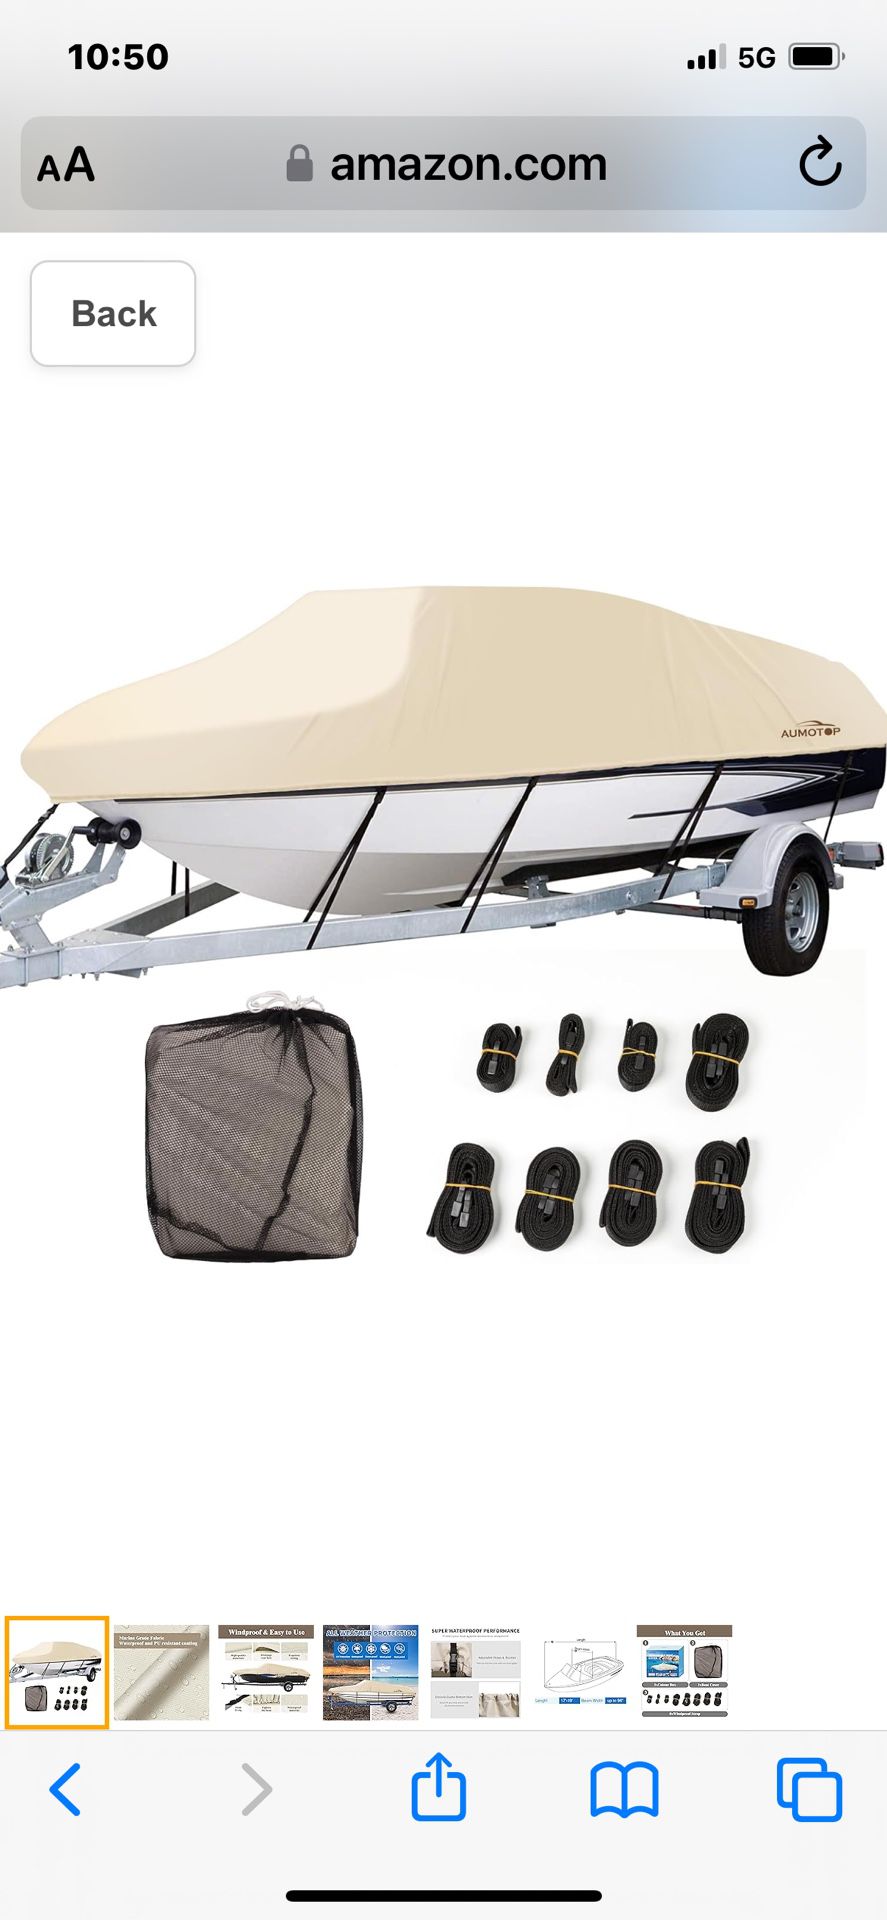 Boat Cover 17-19ft, Heavy Duty Trailerable Waterproof Boat Cover, UV Resistant Marine Grade Outboard Covers Fits for V-Hull, Fish&Ski, Beige，Pro-Style